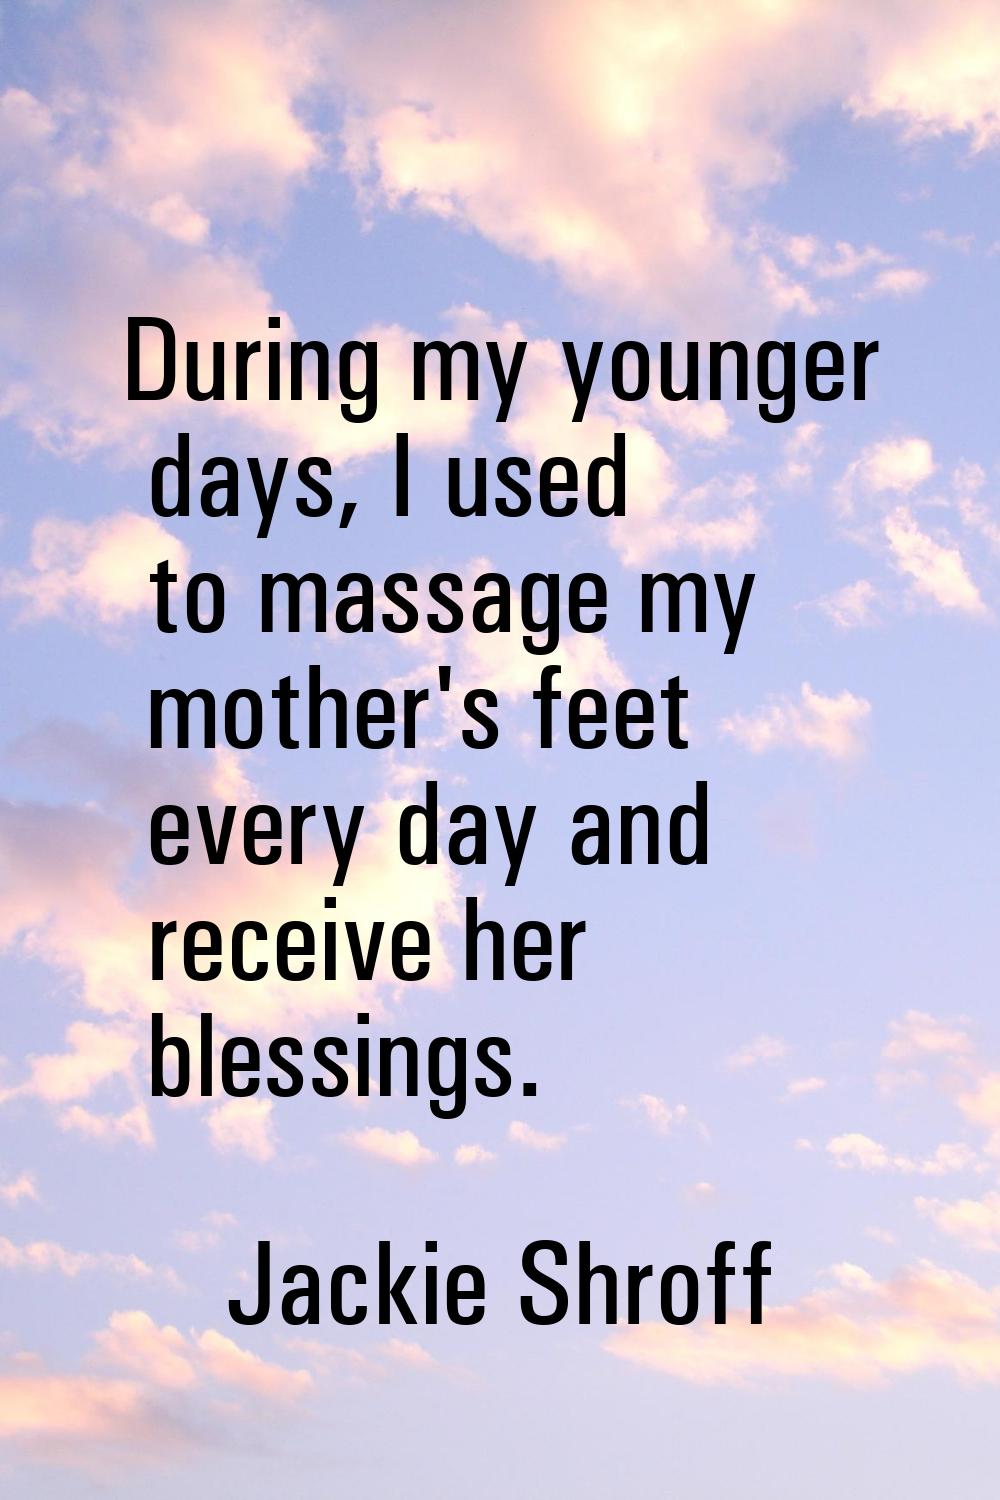 During my younger days, I used to massage my mother's feet every day and receive her blessings.